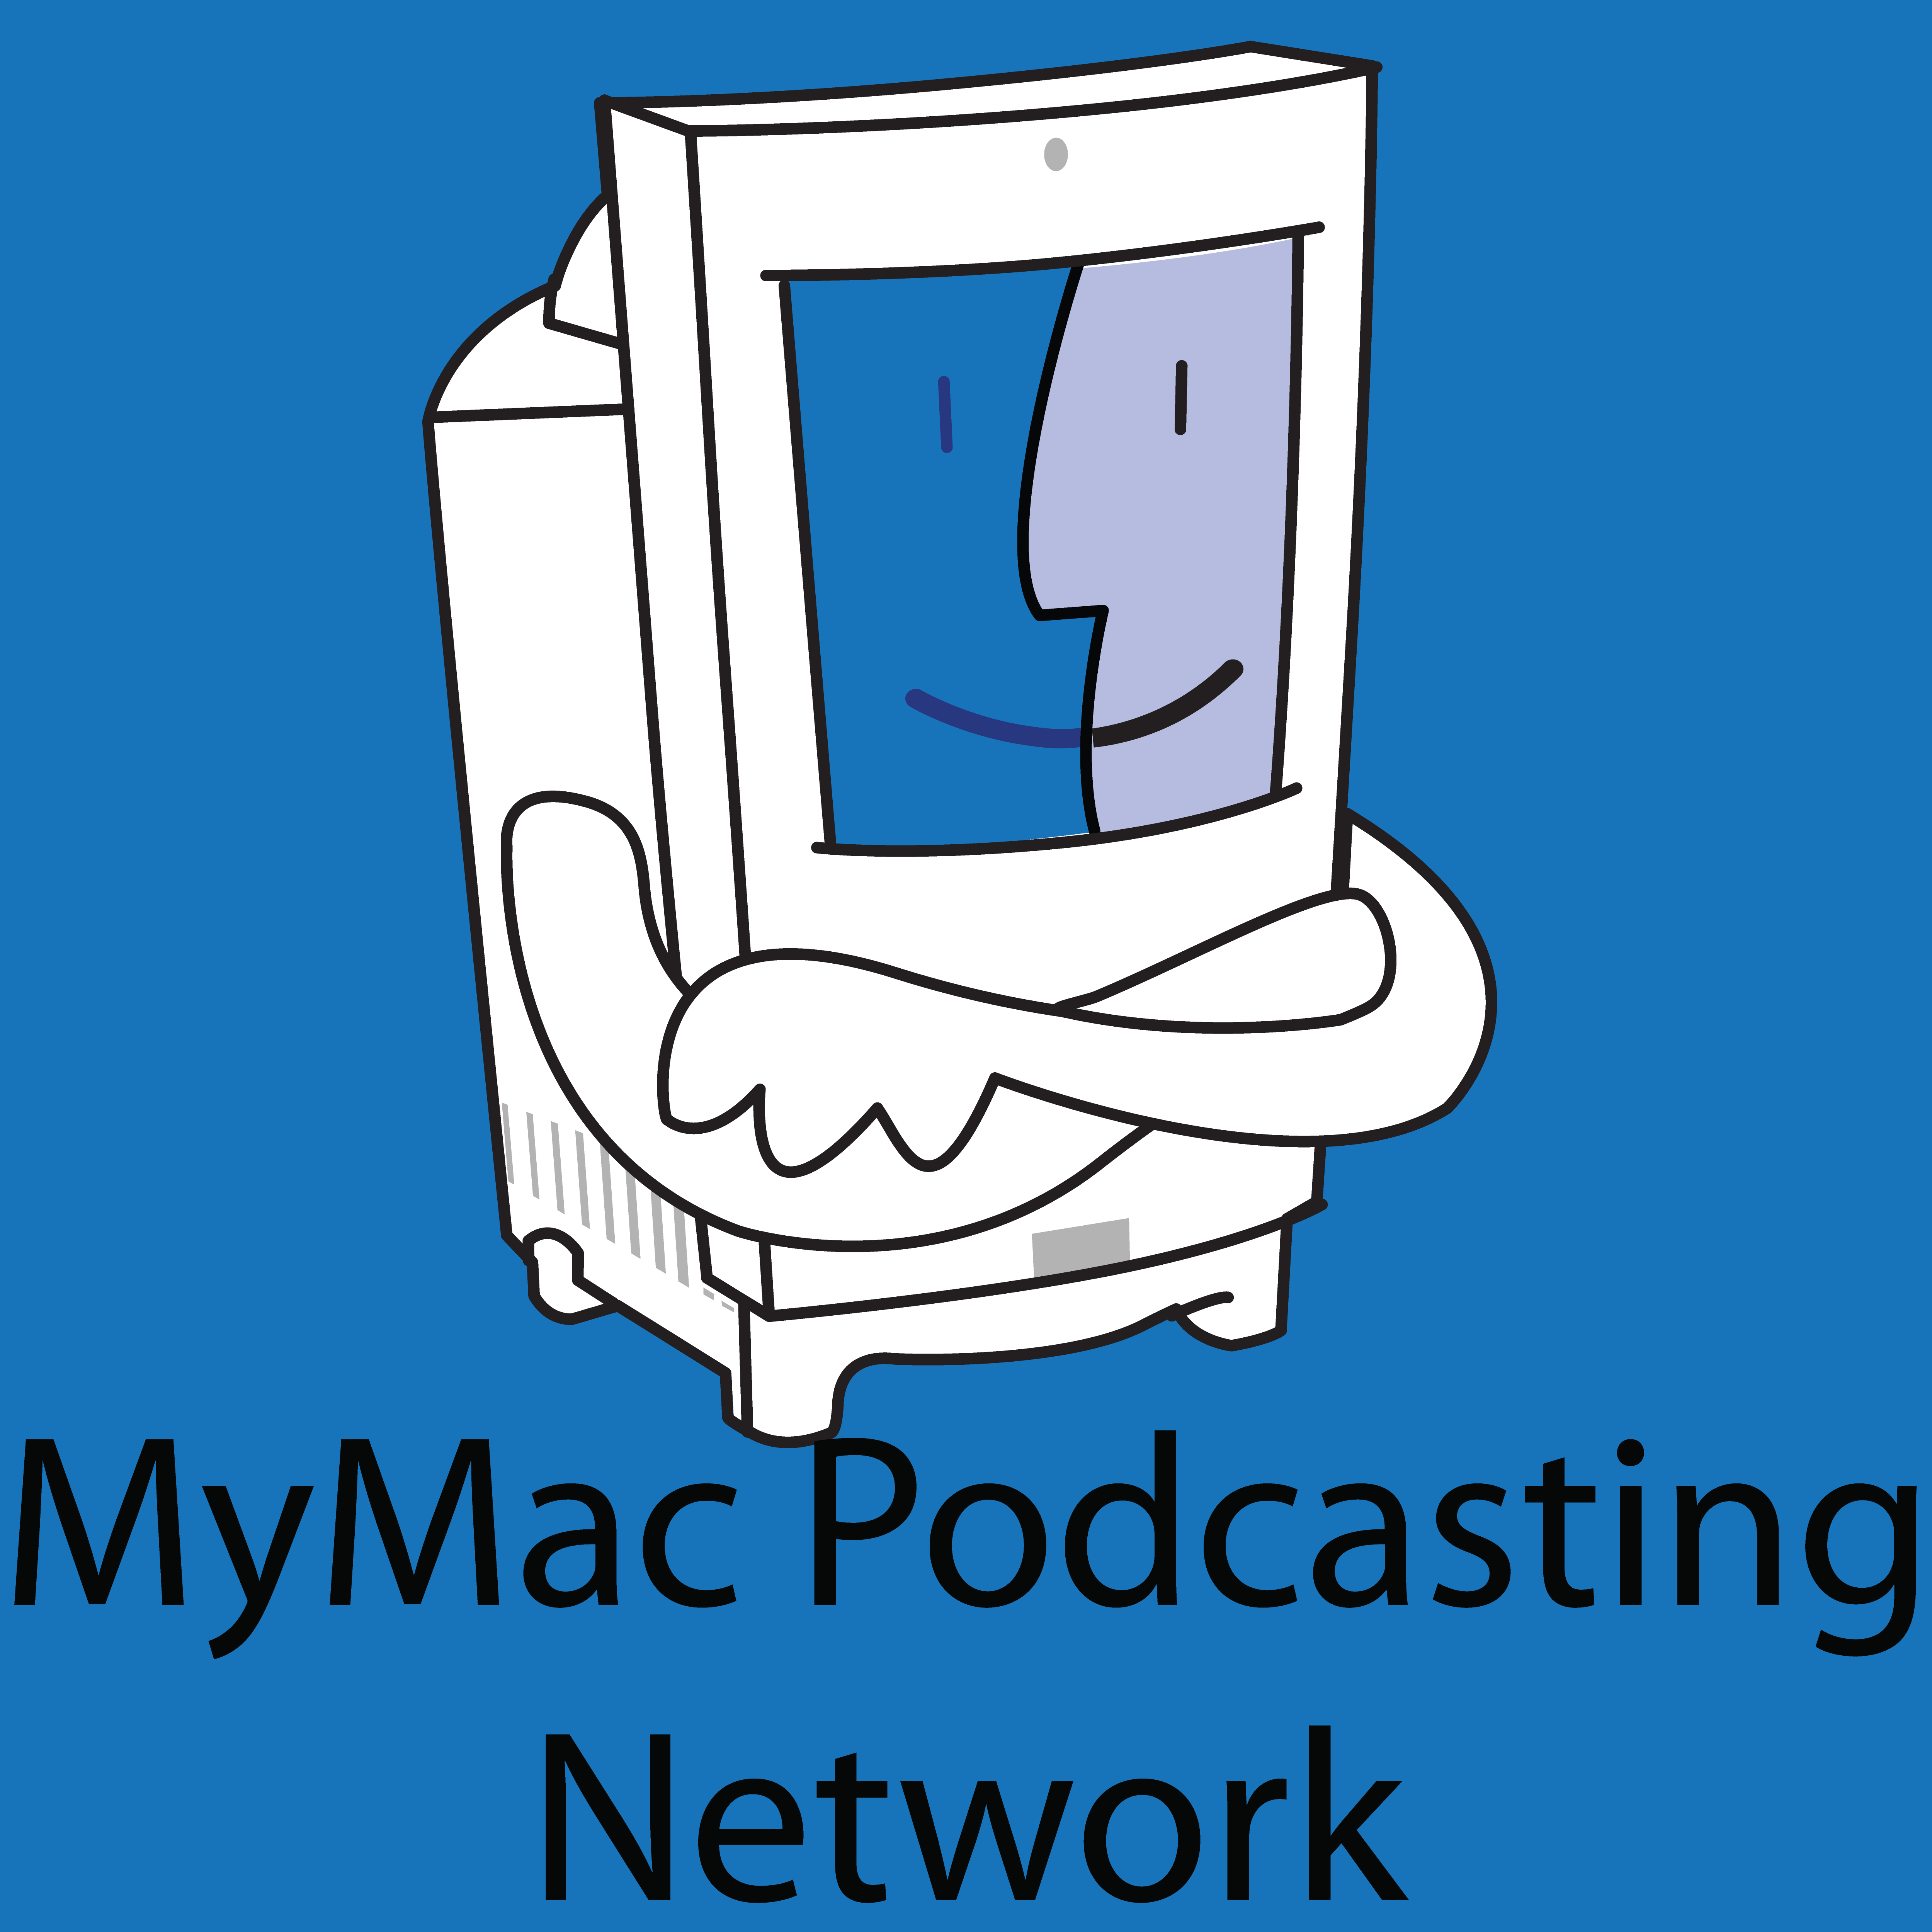 MyMac Podcasting Network - All Shows Channel